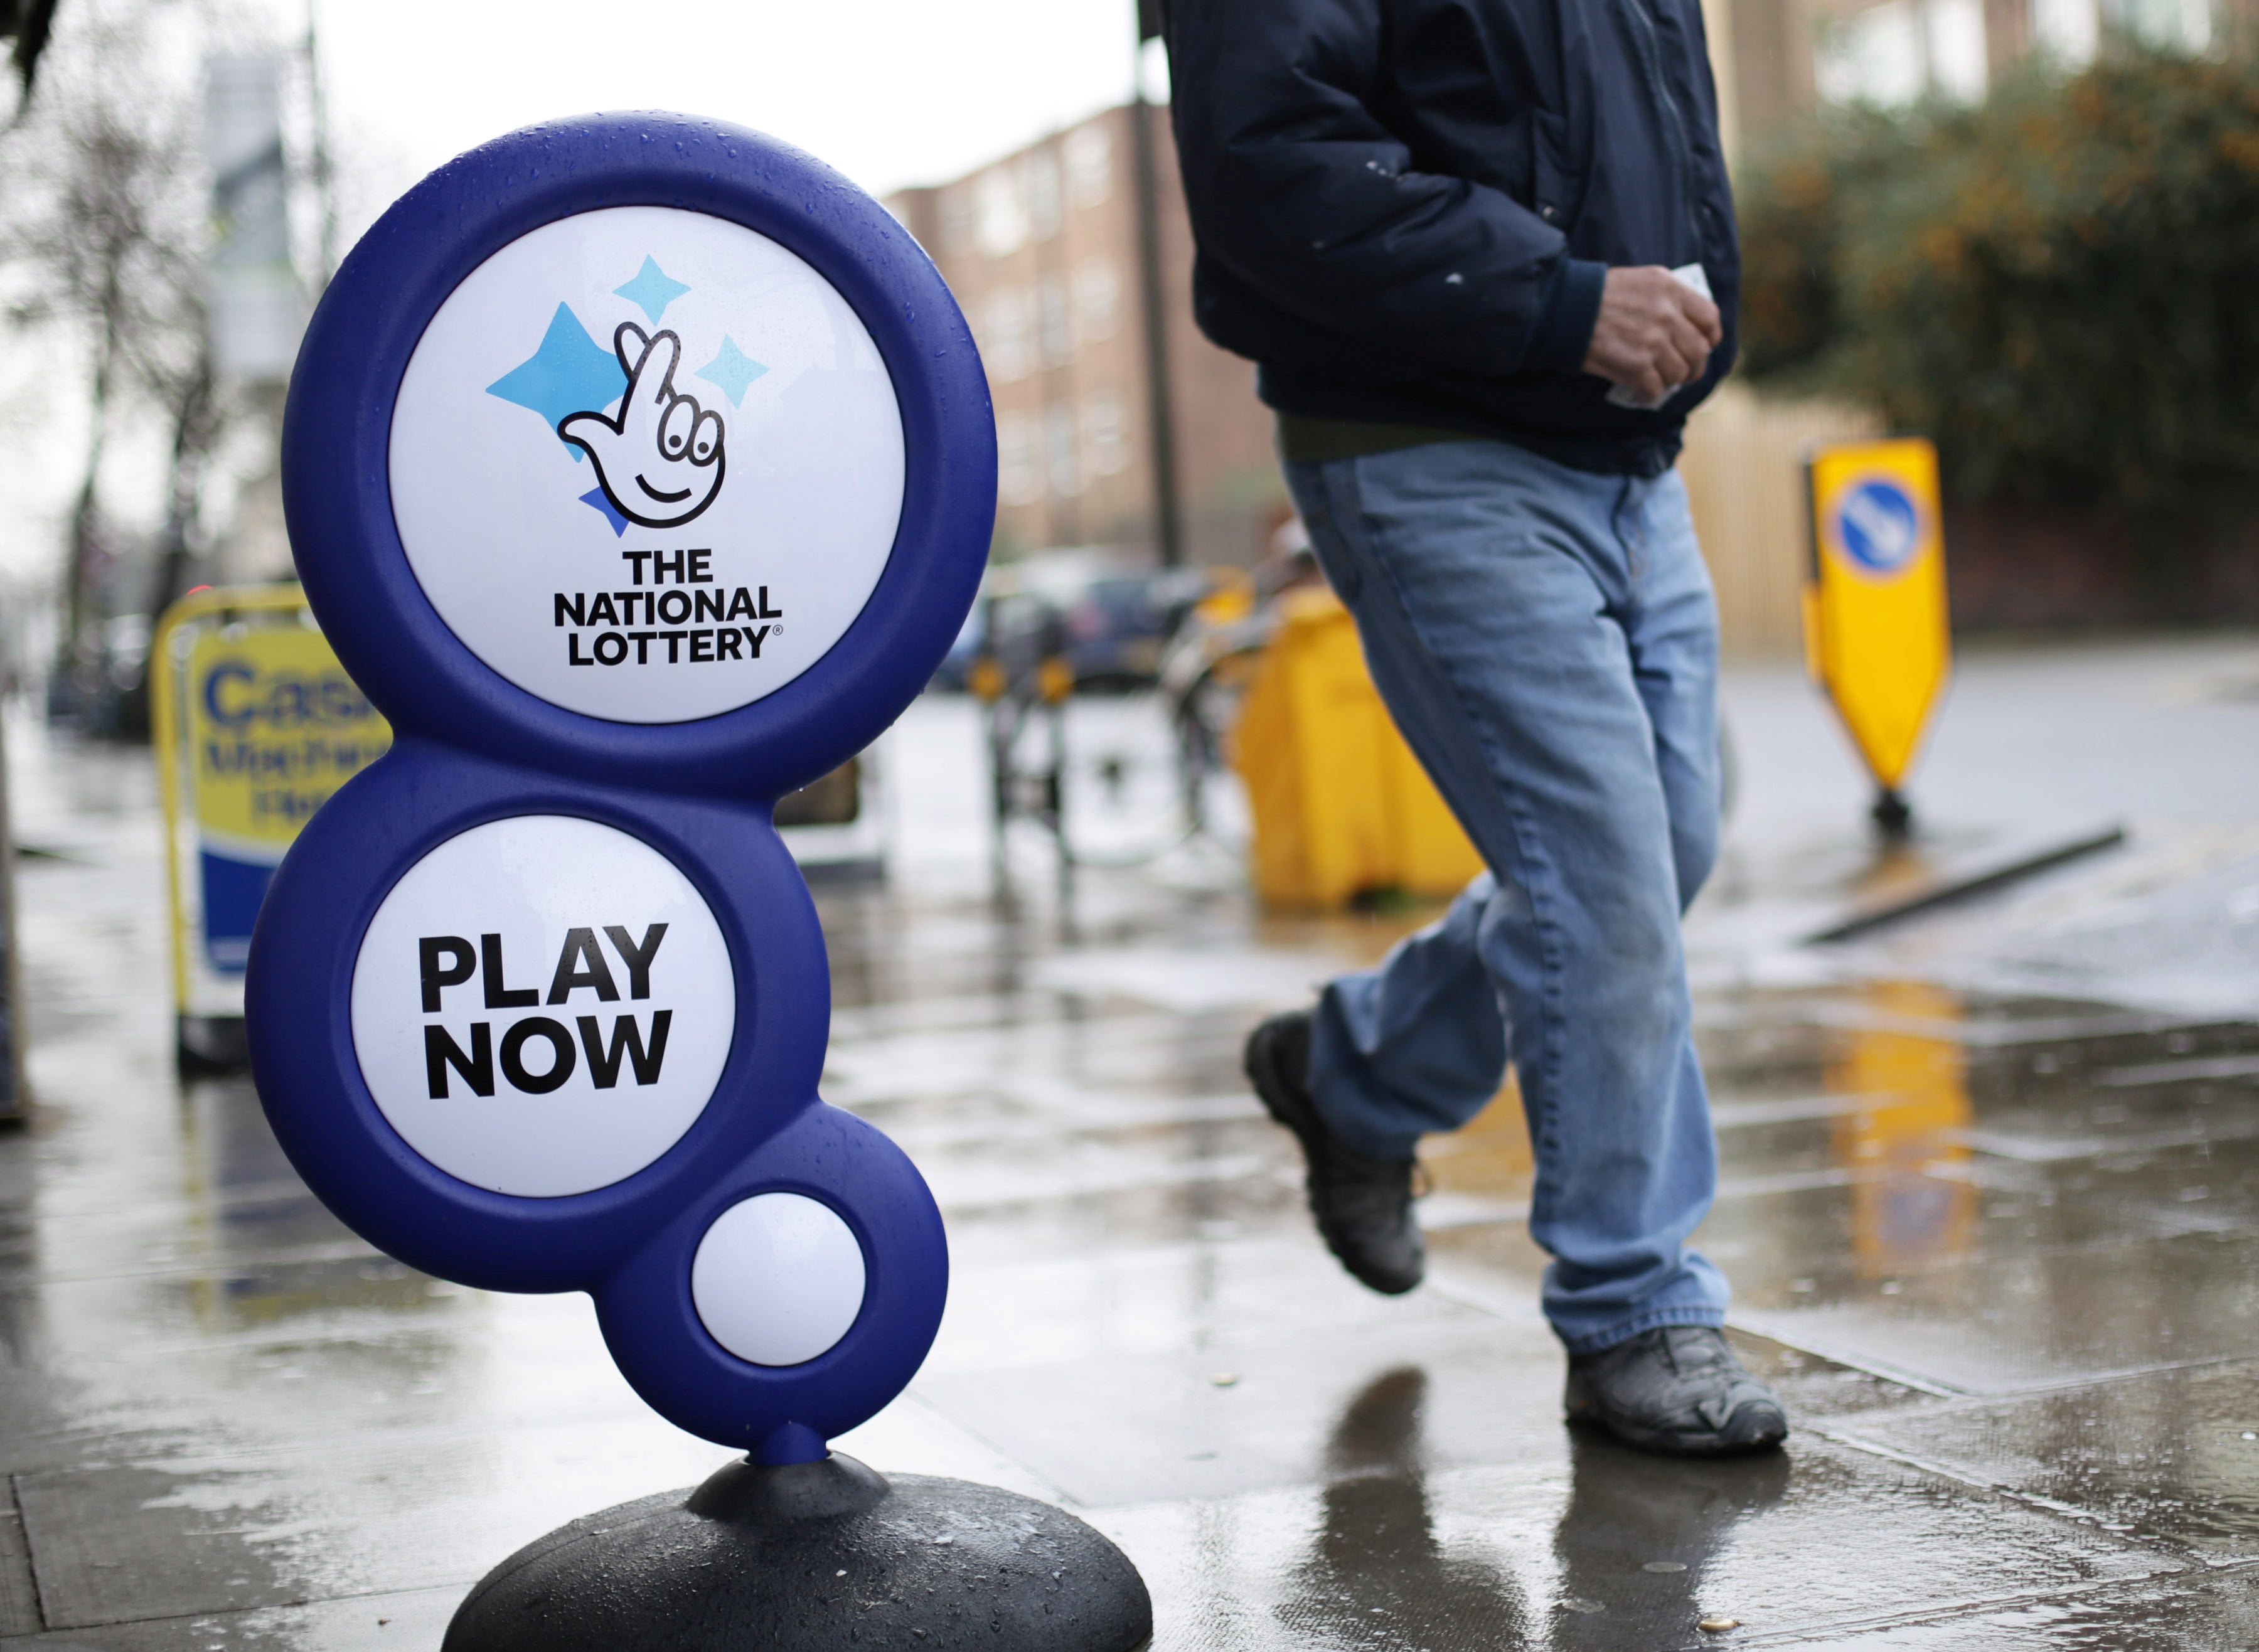 The 10-year licence to operate the National Lottery is one of the biggest contracts handed out by the government